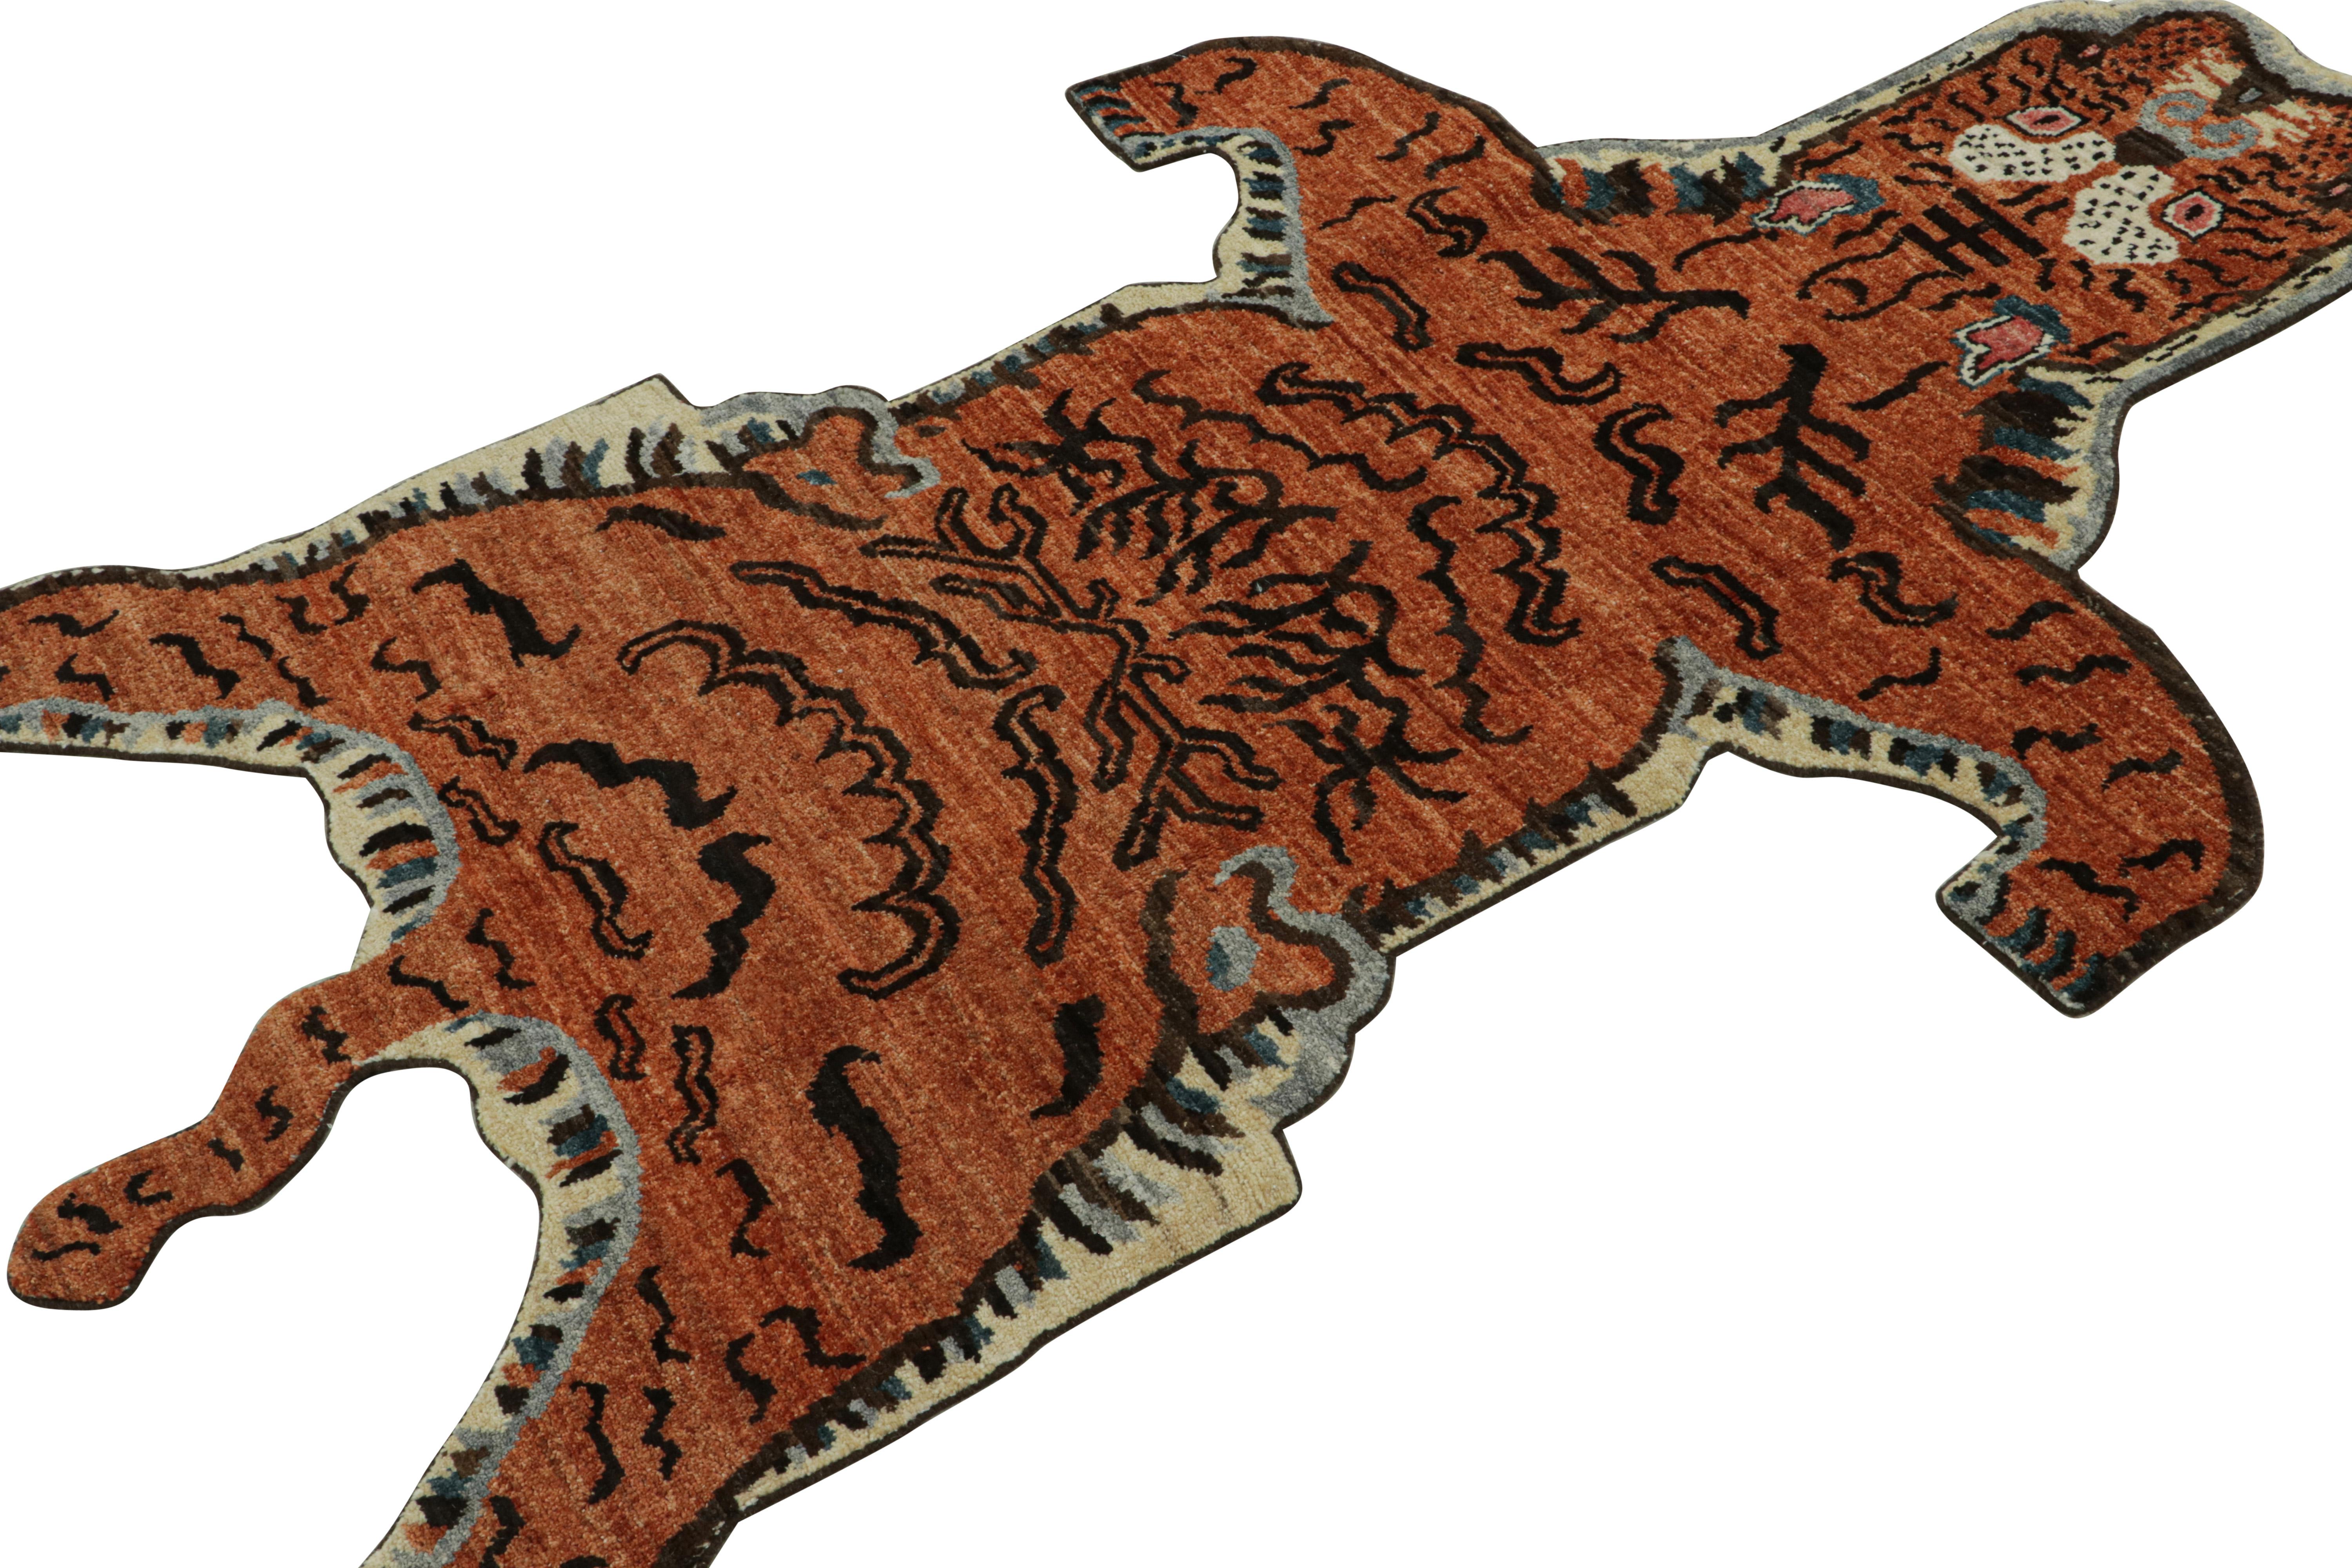 This contemporary 4×6 tiger skin irregular shaped rug is a bold new addition to Rug & Kilim’s Modern Classics Tiger Collection. Our collection spans several cultures and recaptures iconic pictorial styles just like this particular rug. 

On the